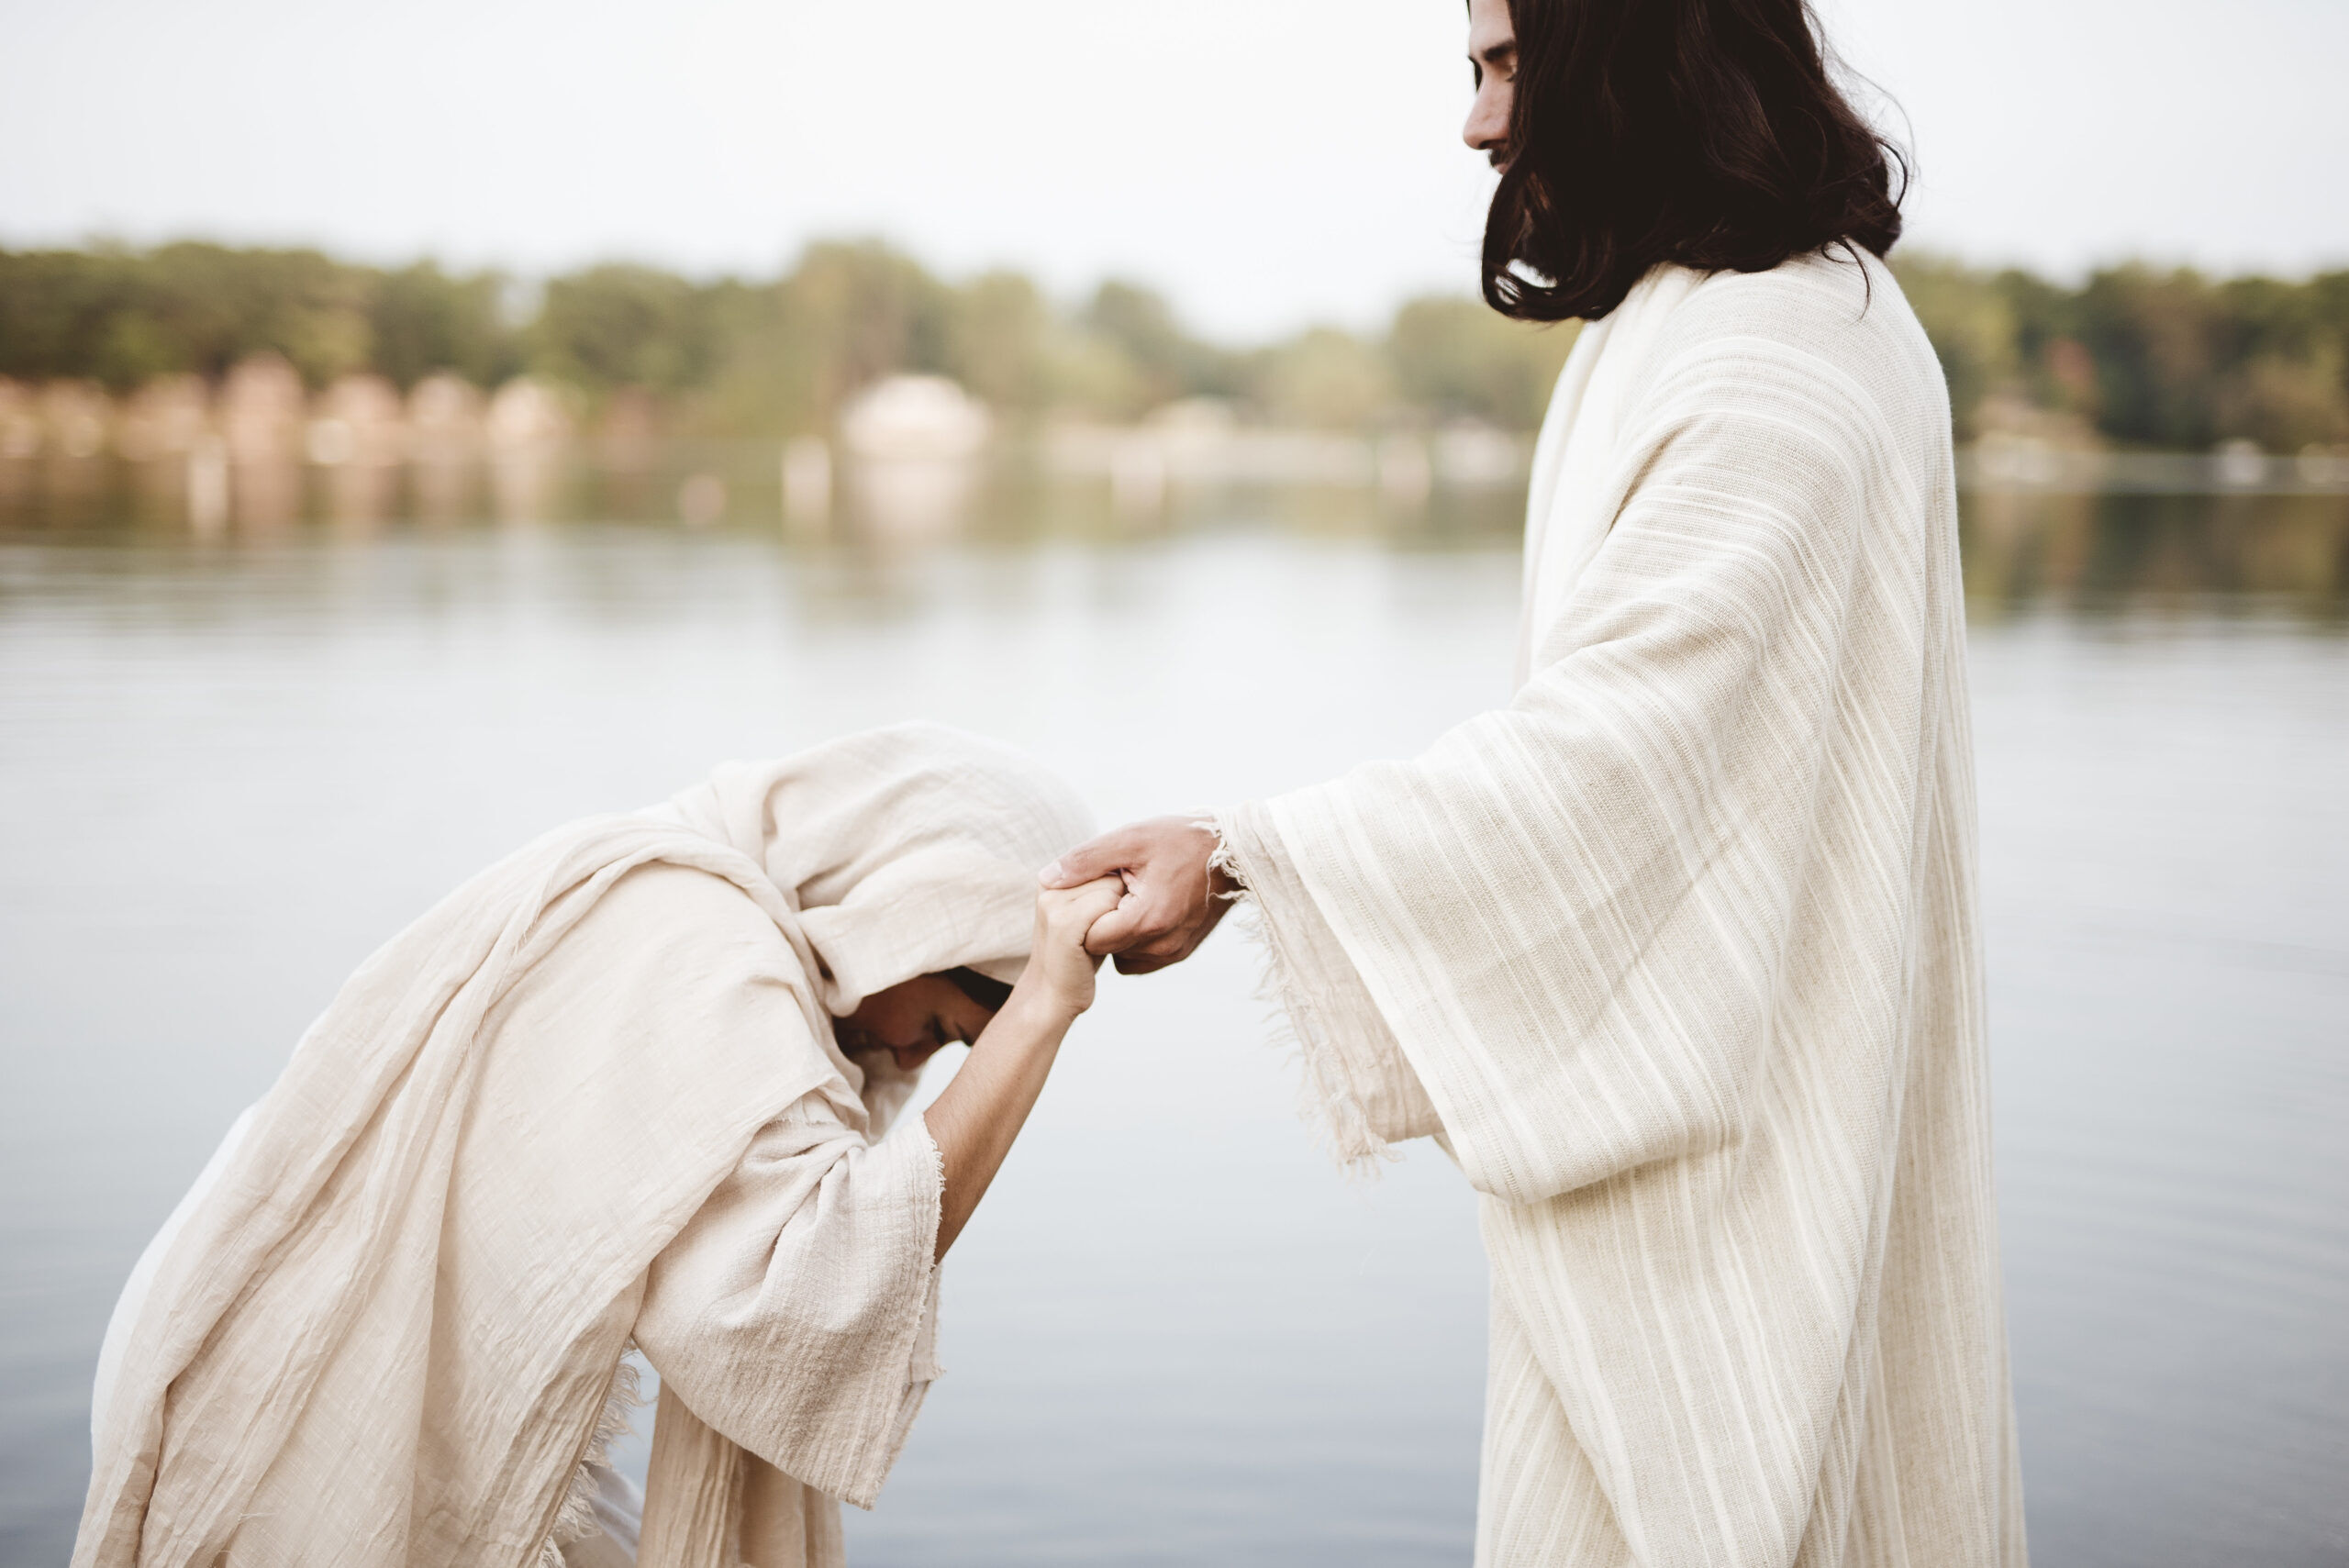 Jesus shows love to a trans woman